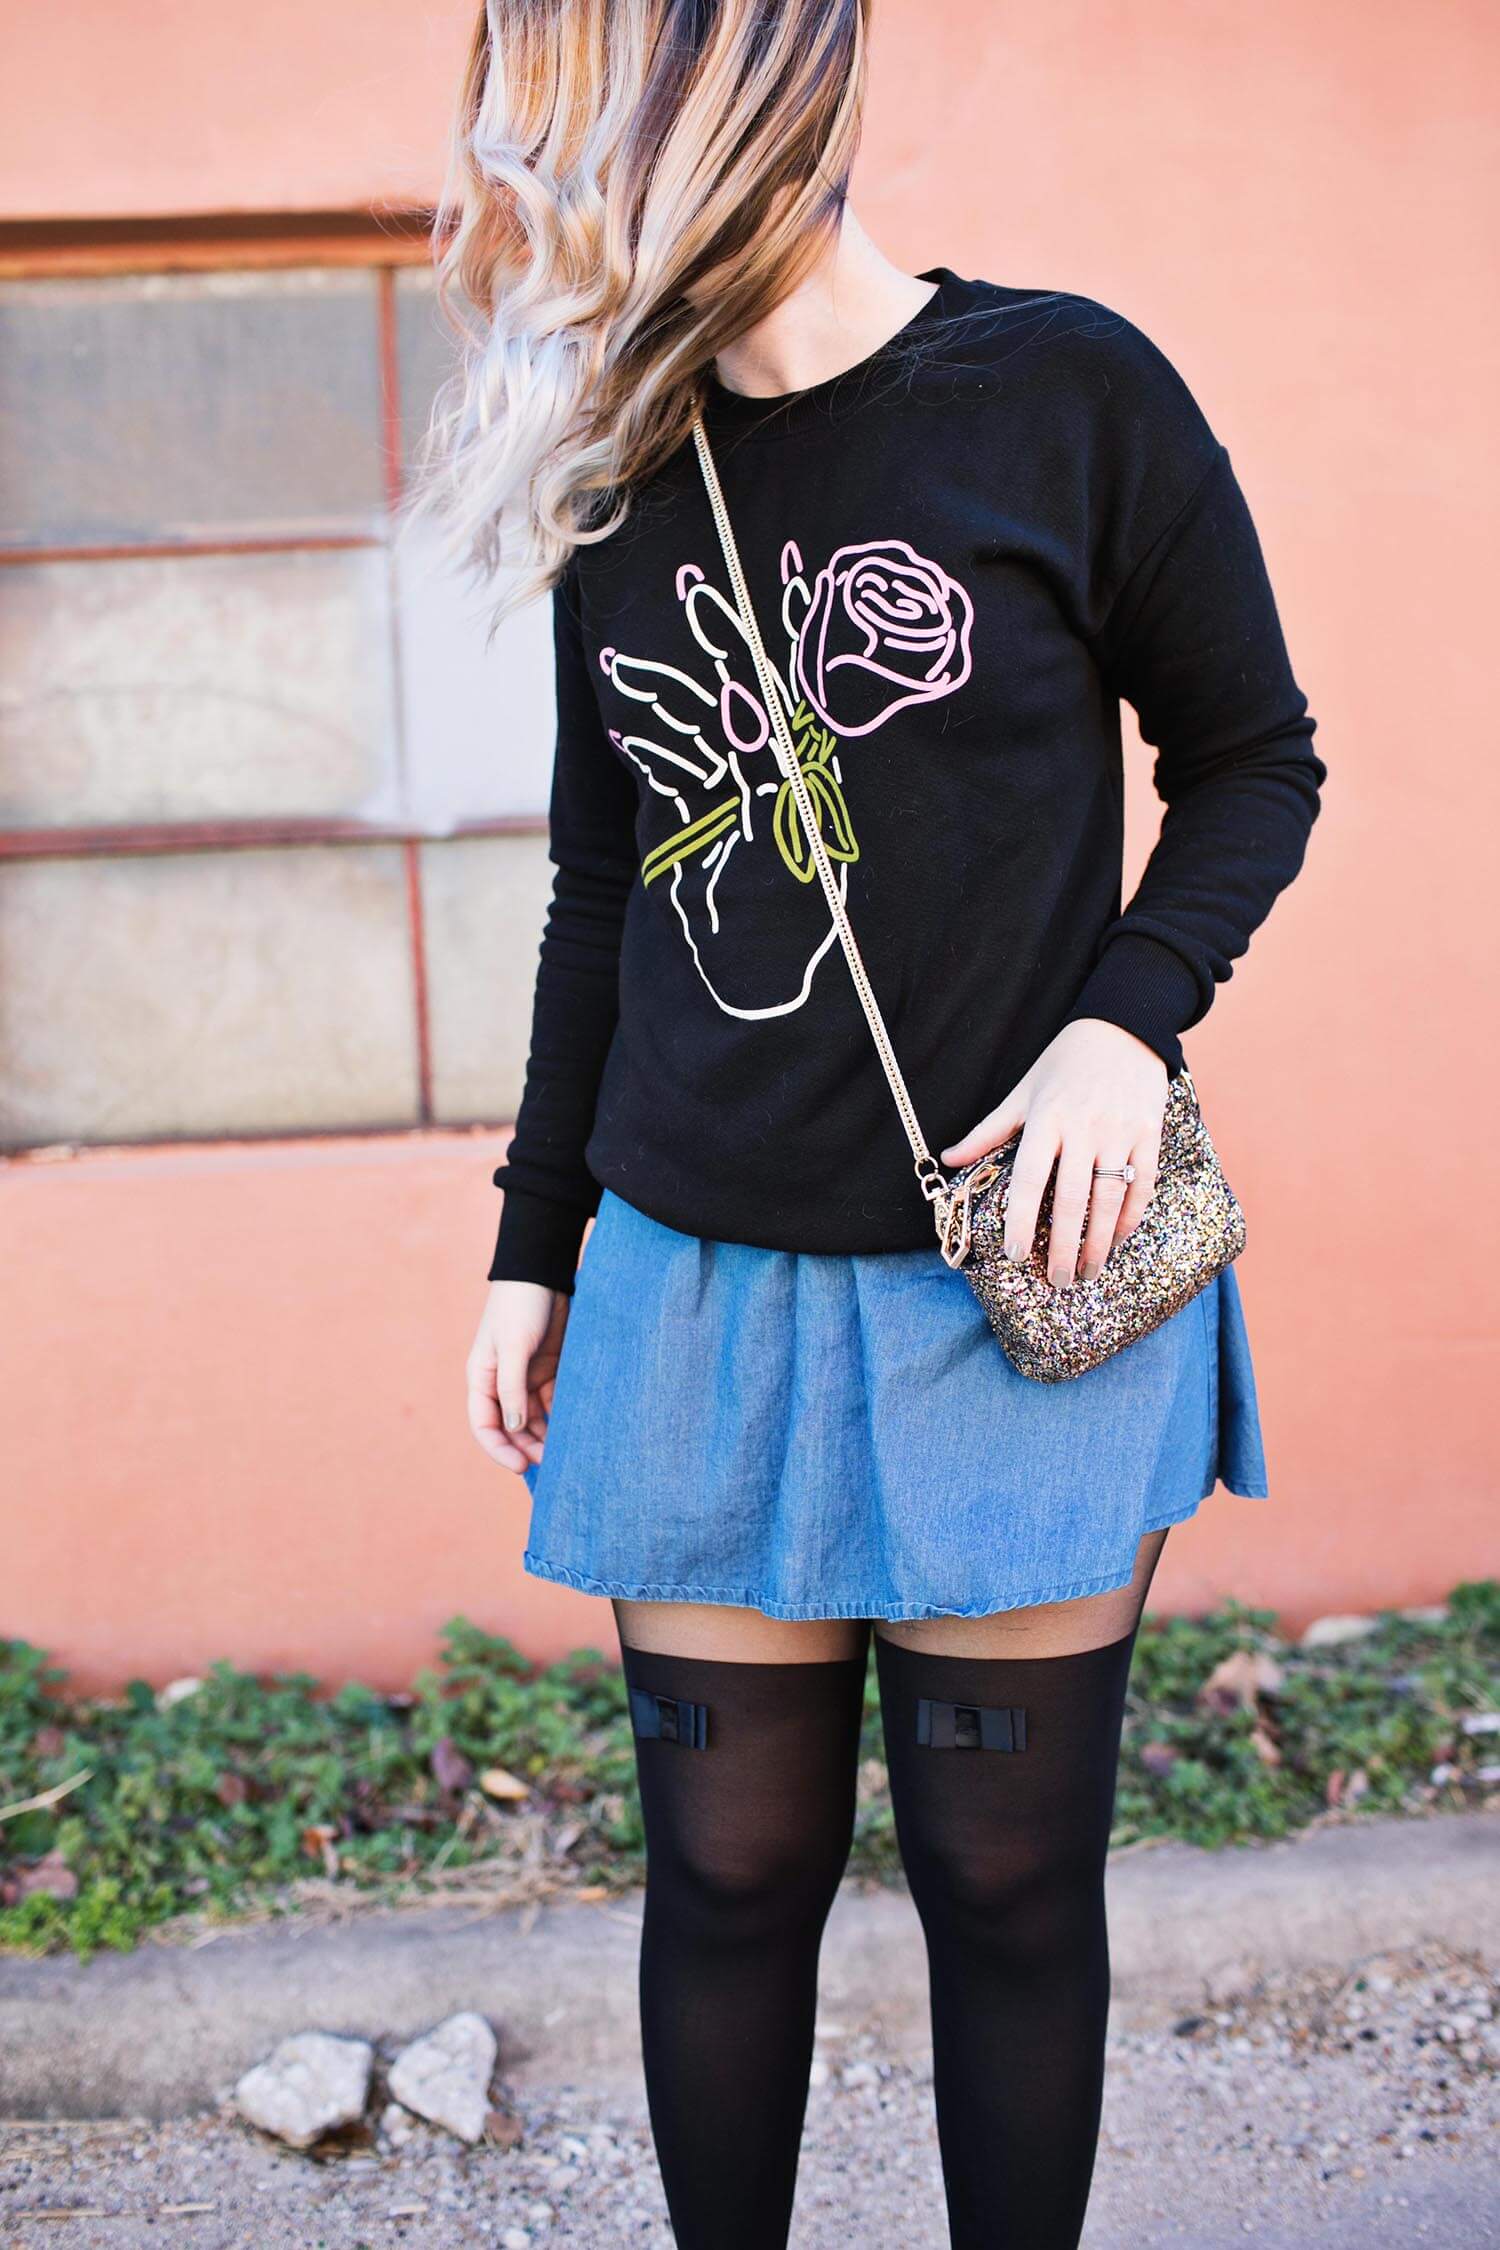 Sweaters and tights